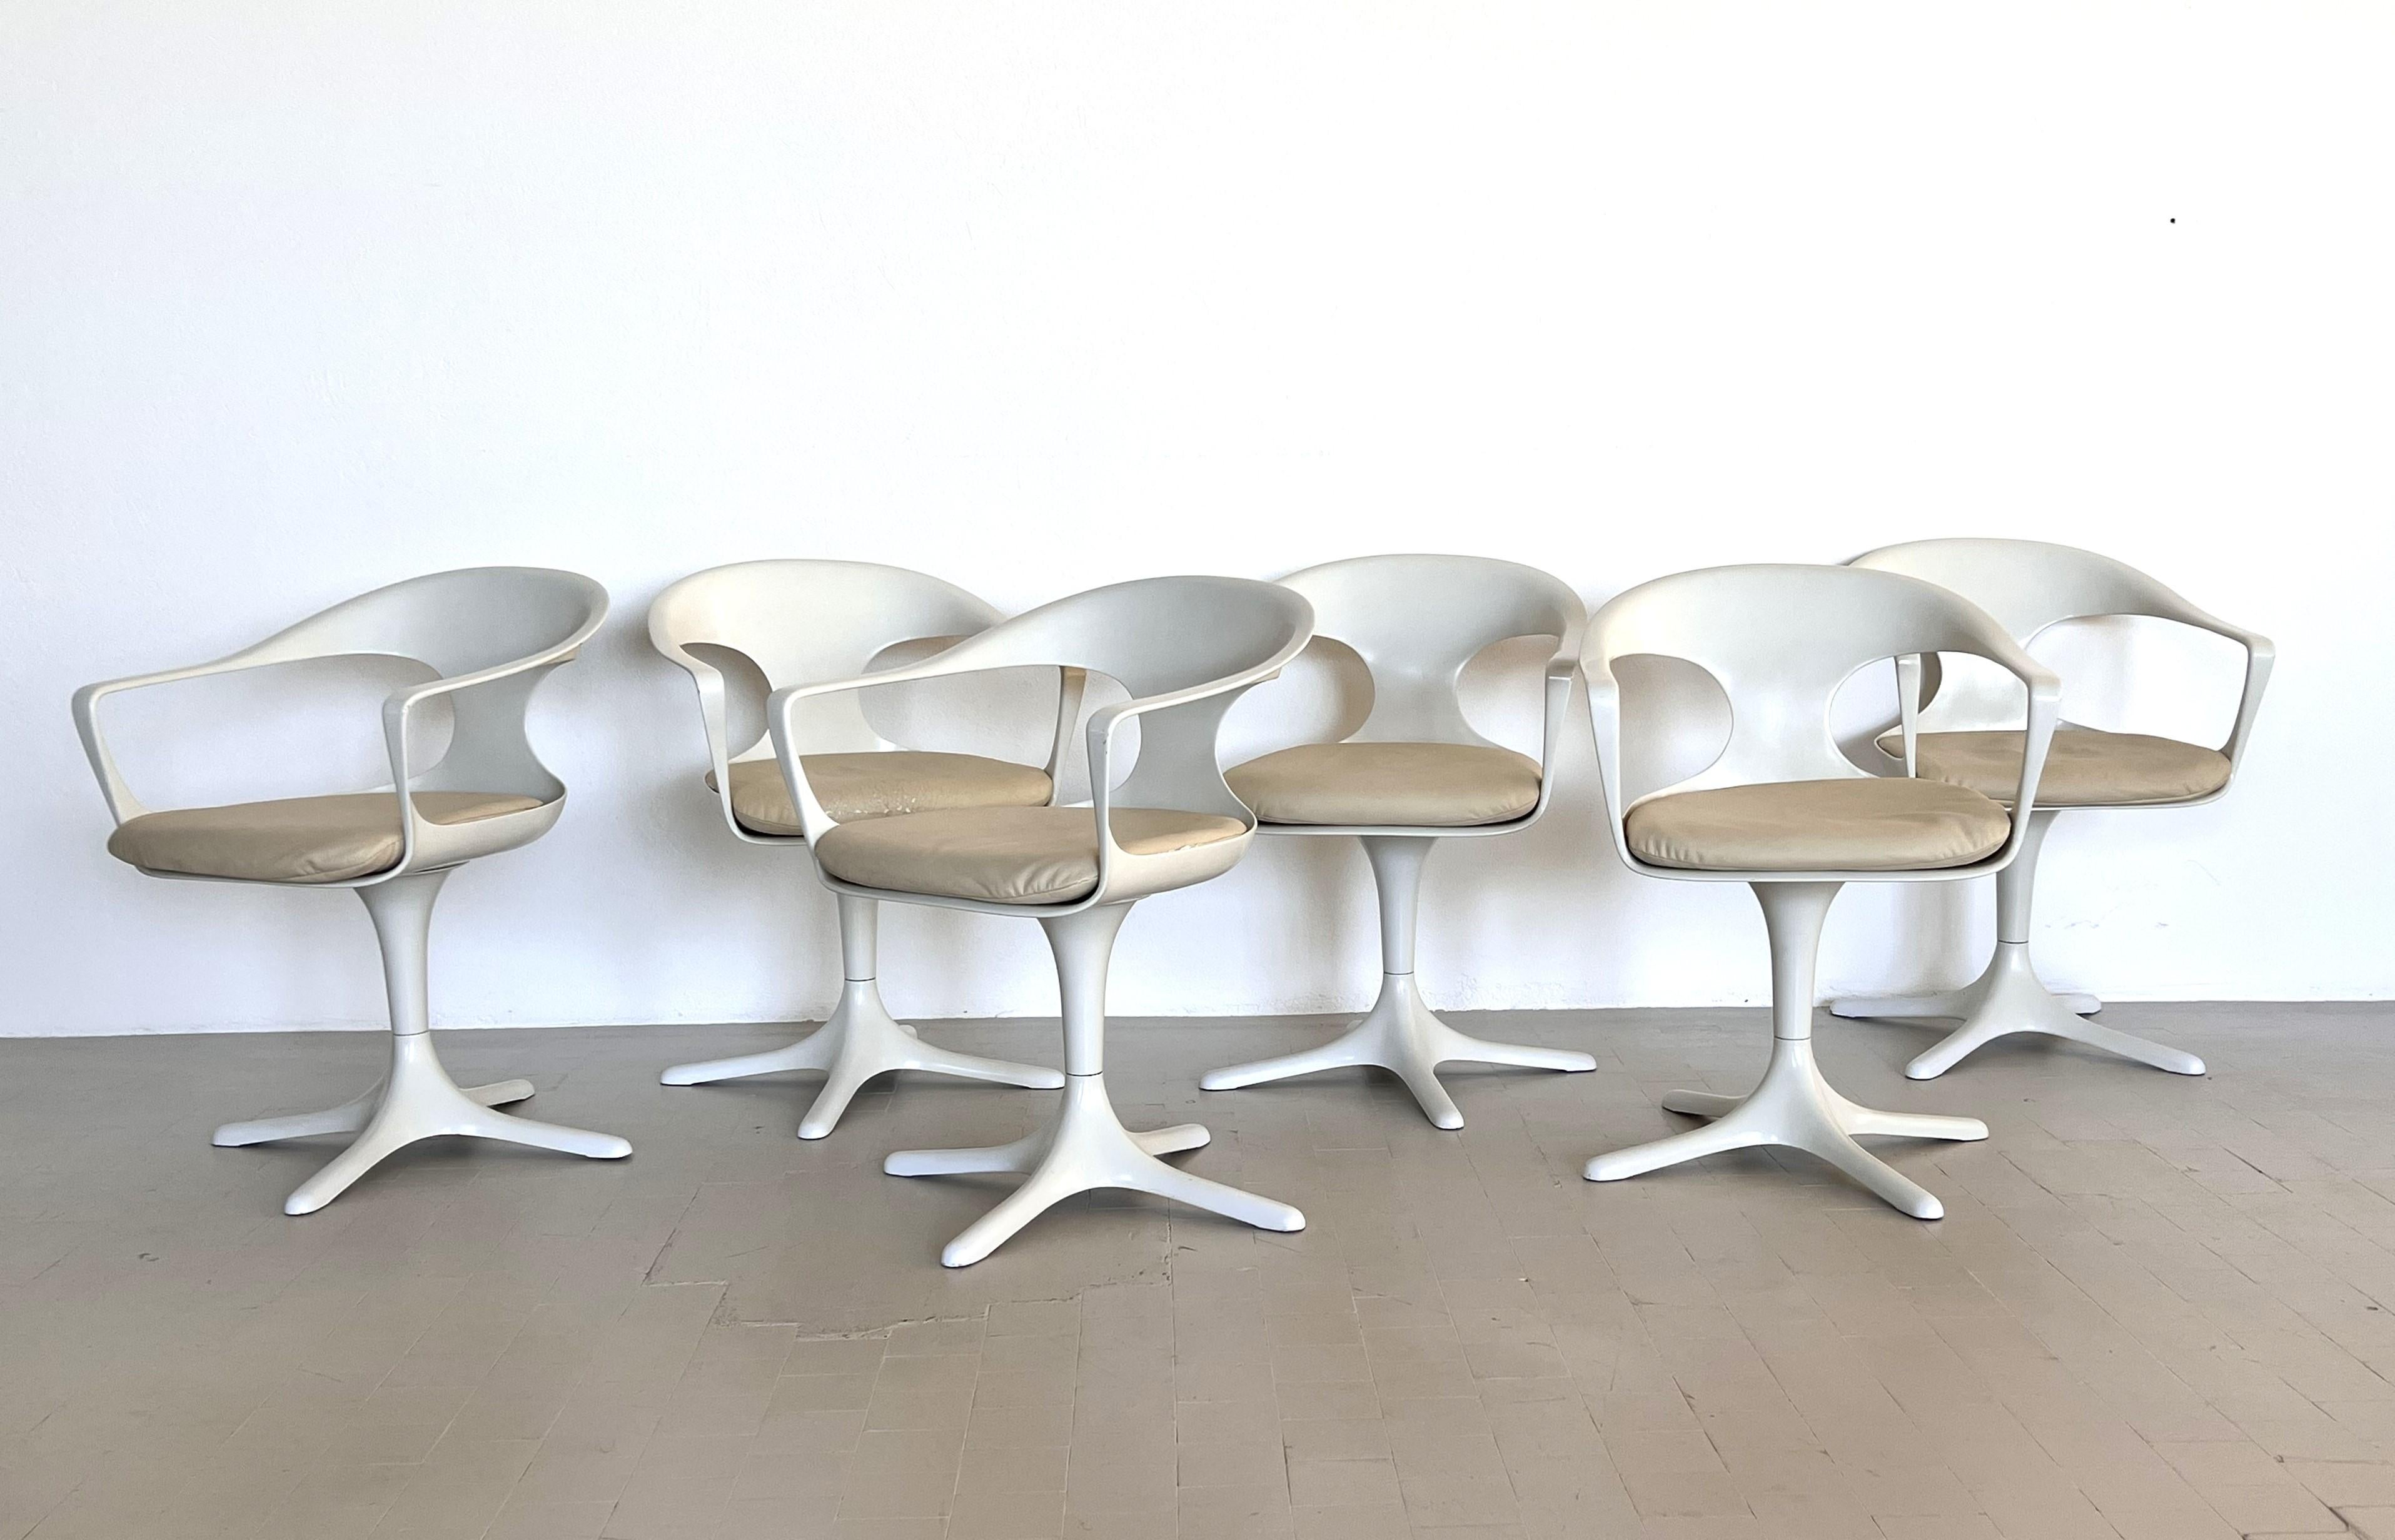 Space Age Swivel Dining Room Chairs by Konrad Schäfer, Set of 6, 1960s For Sale 11